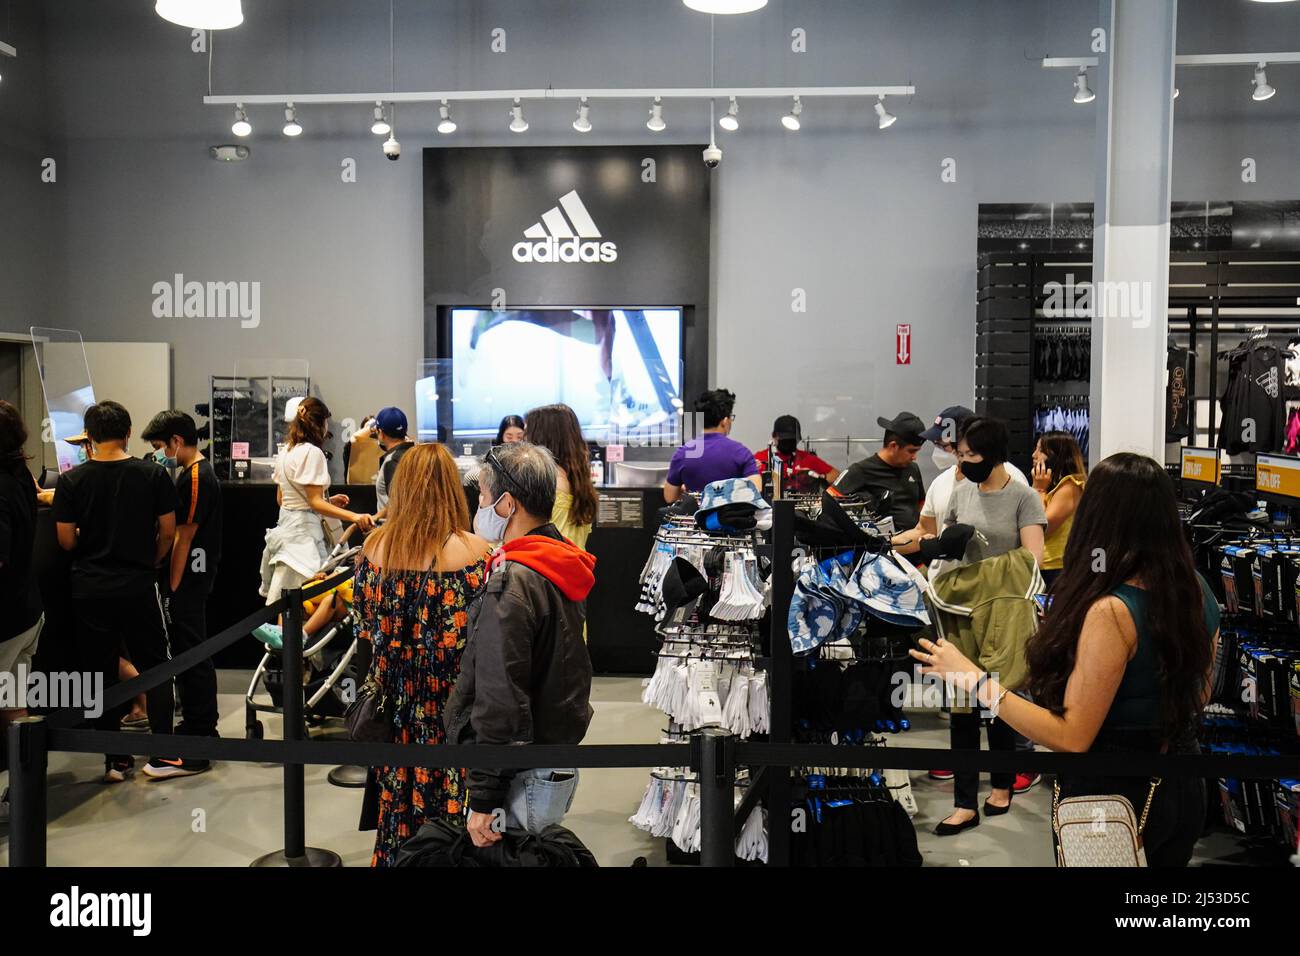 People seen shopping inside an Adidas store at The Outlets in Orange. Many  people shop at The Outlets in Orange, for clothes, shoes, watches, bags,  and backpacks with a discounted price. According